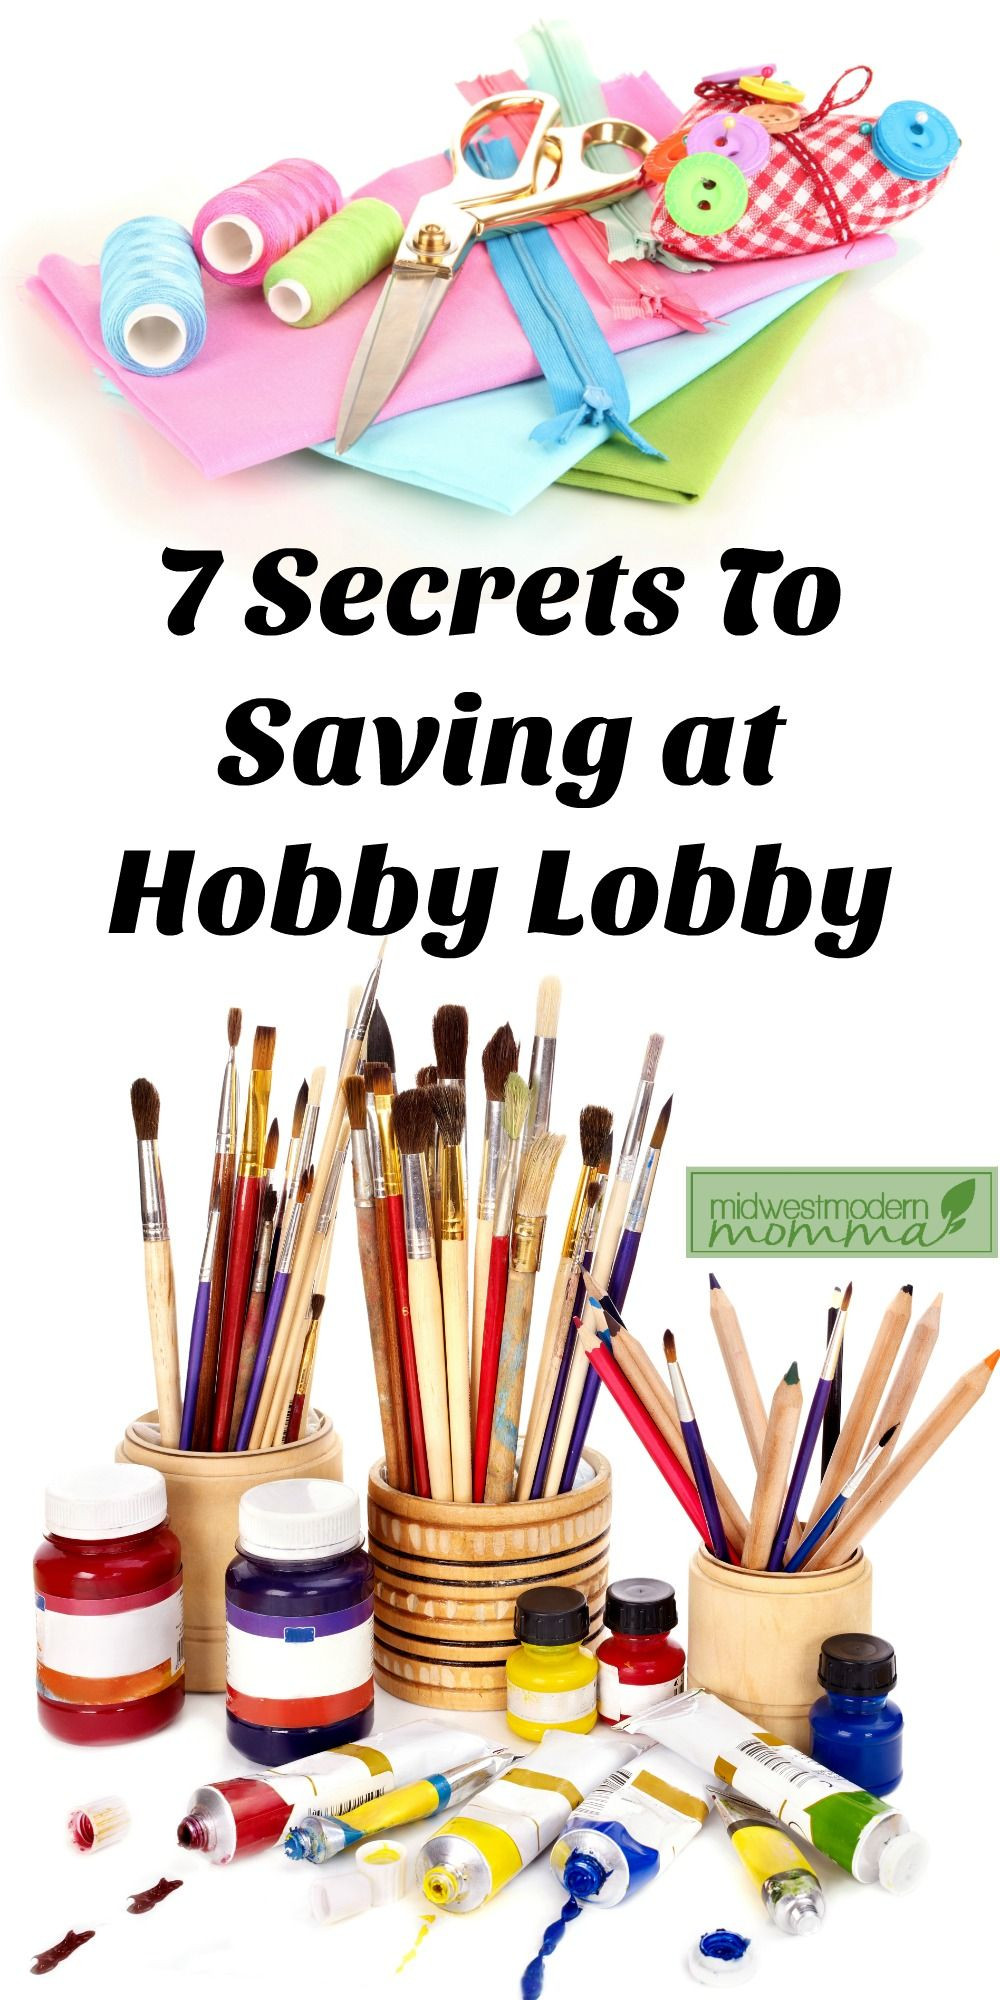 Hobby Lobby Kids Crafts
 7 Ways To Save At Your Hobby Lobby Store